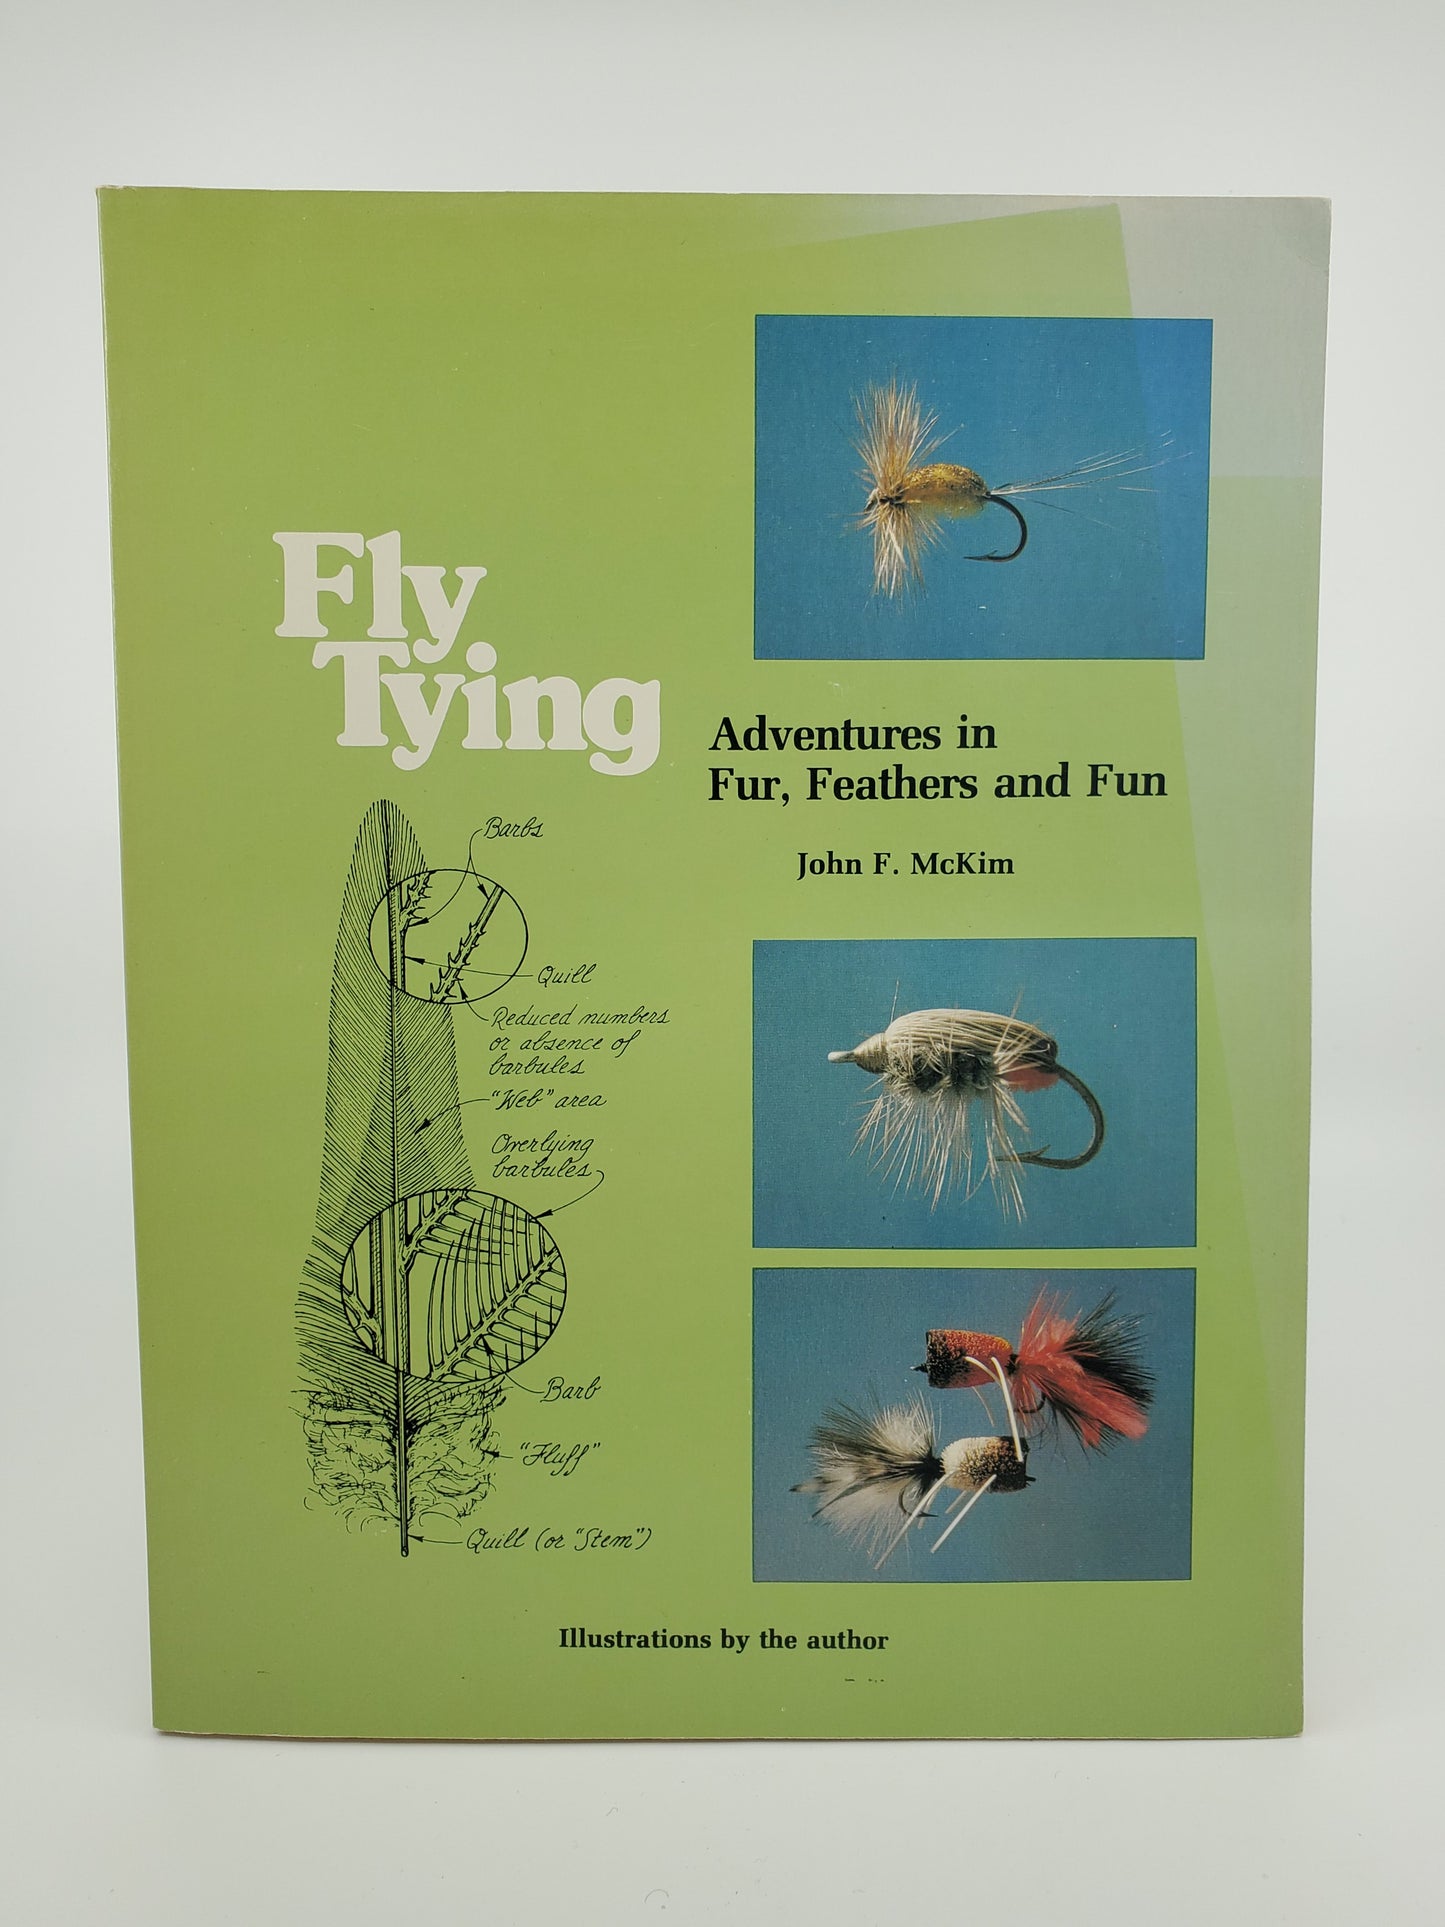 Fly-Tying: Adventures in Fur, Feathers and Fun